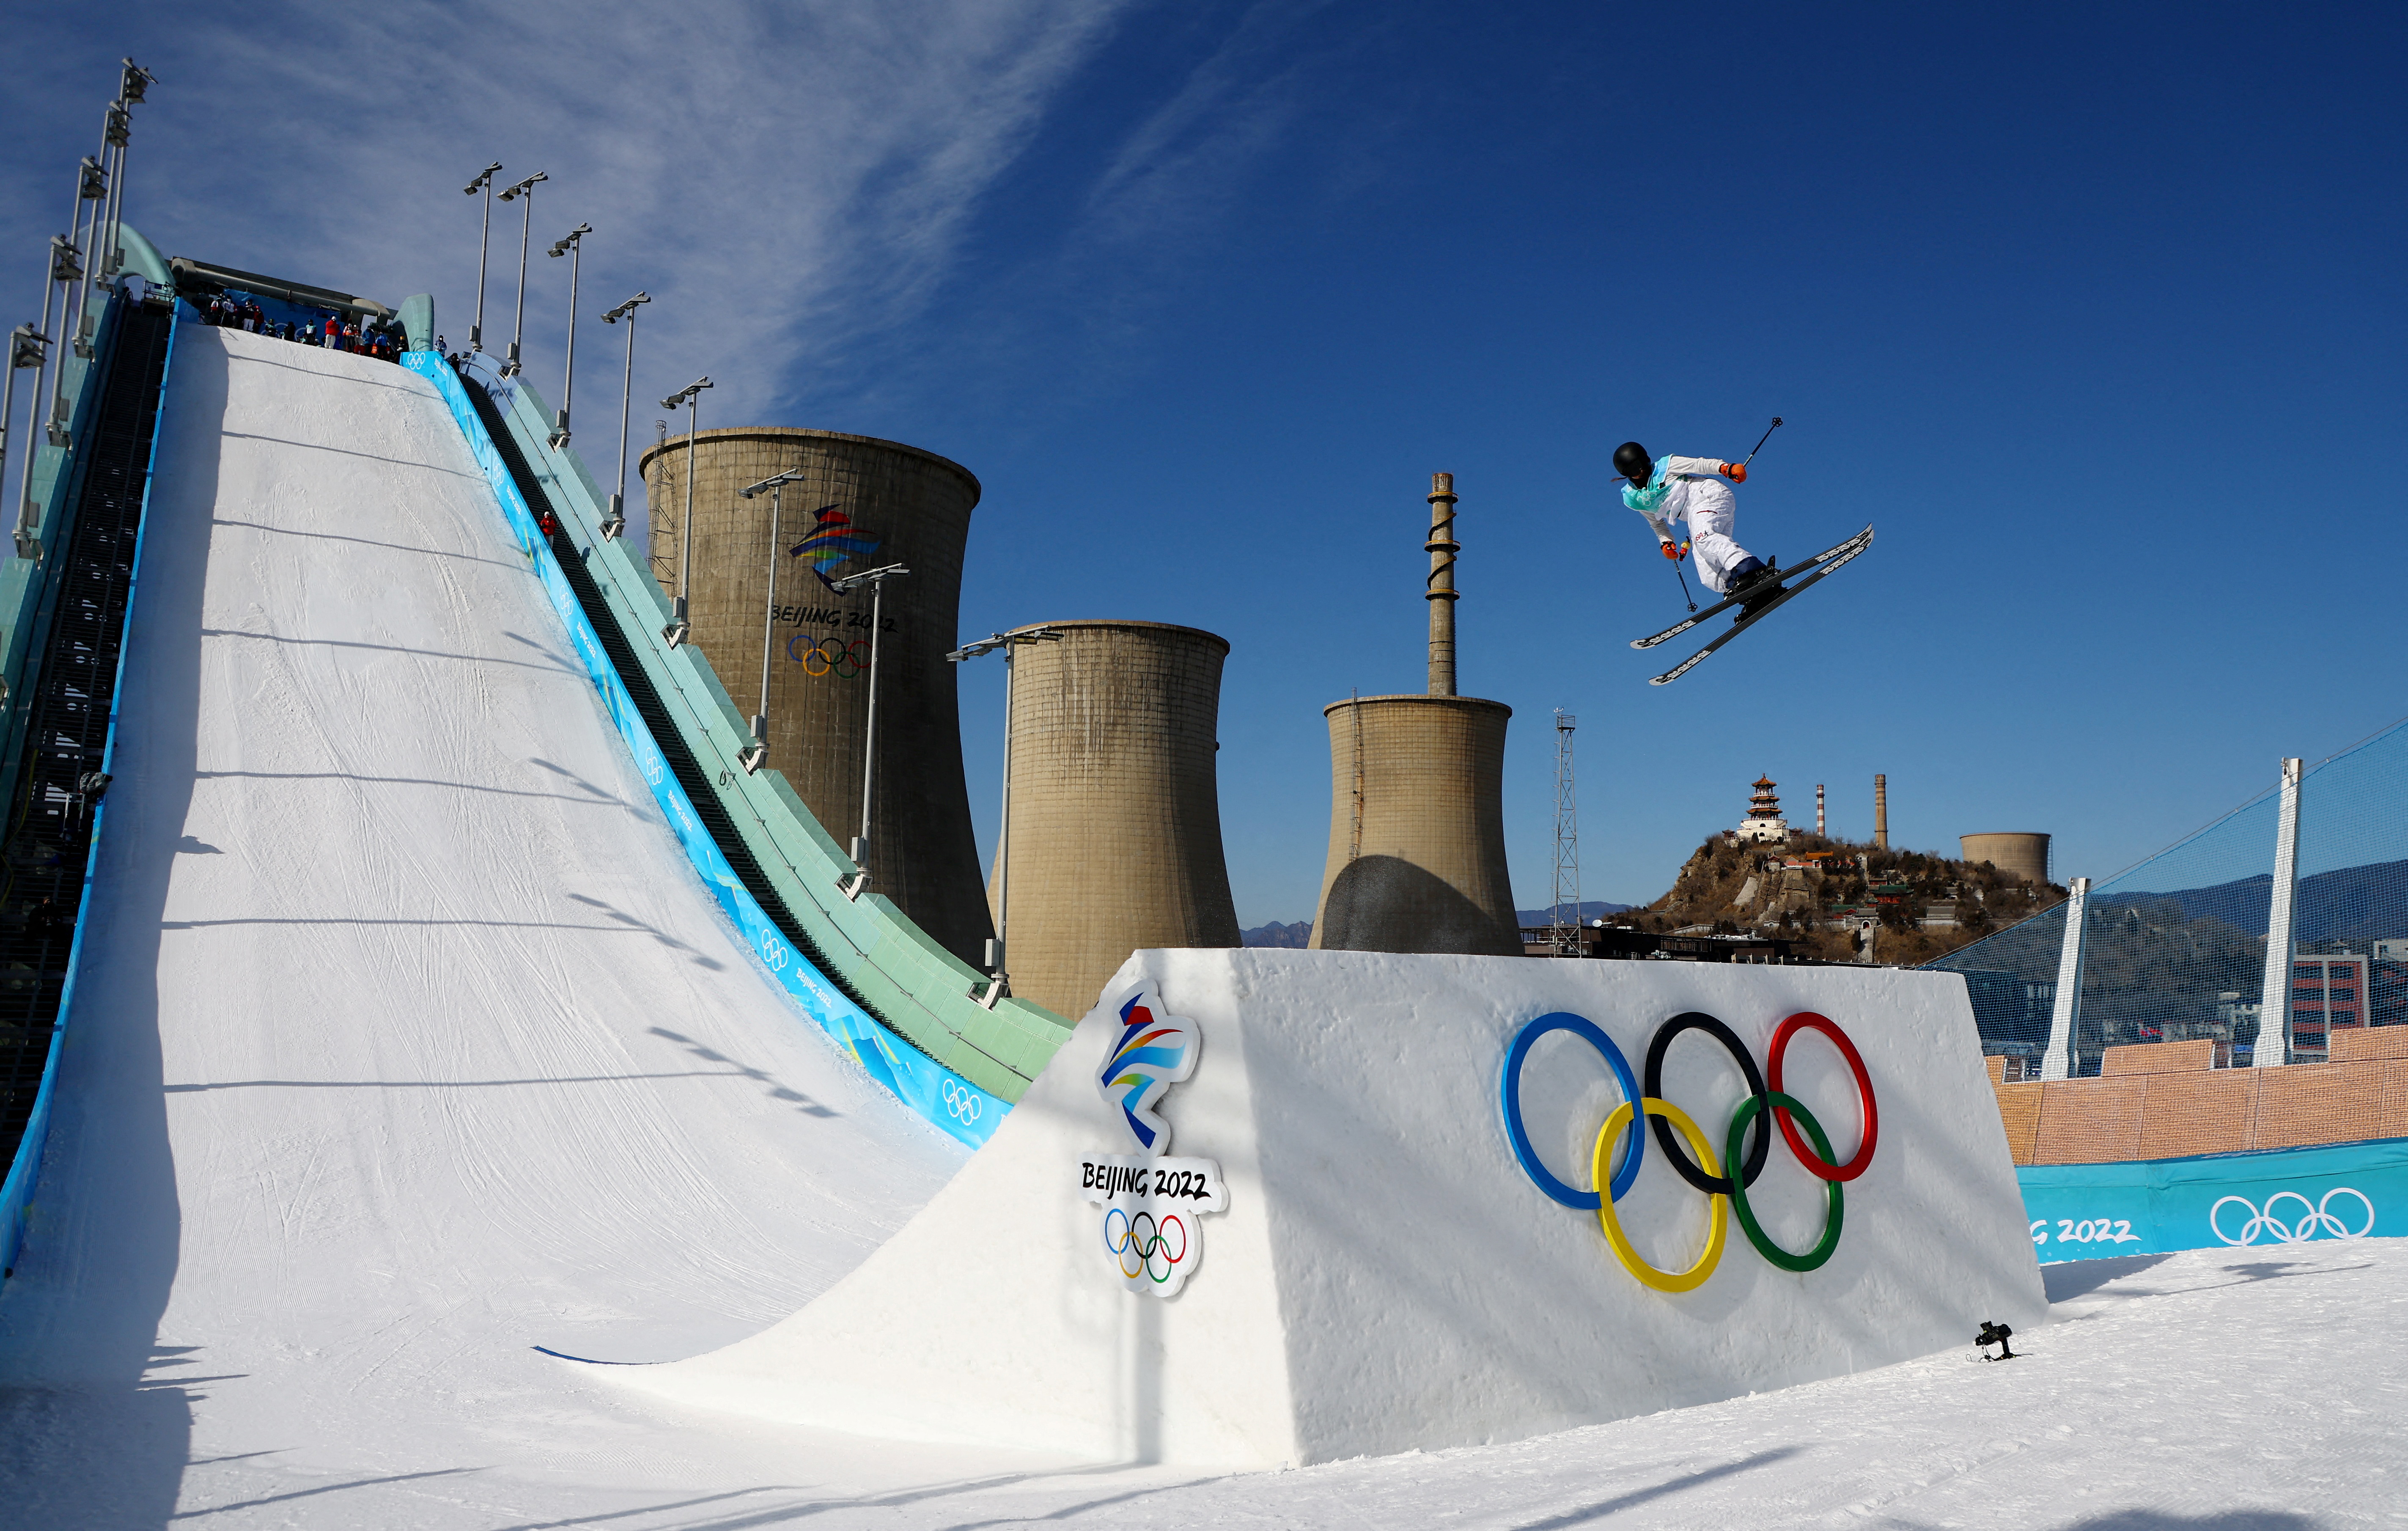 Freestyle Skiing - Official training women and men